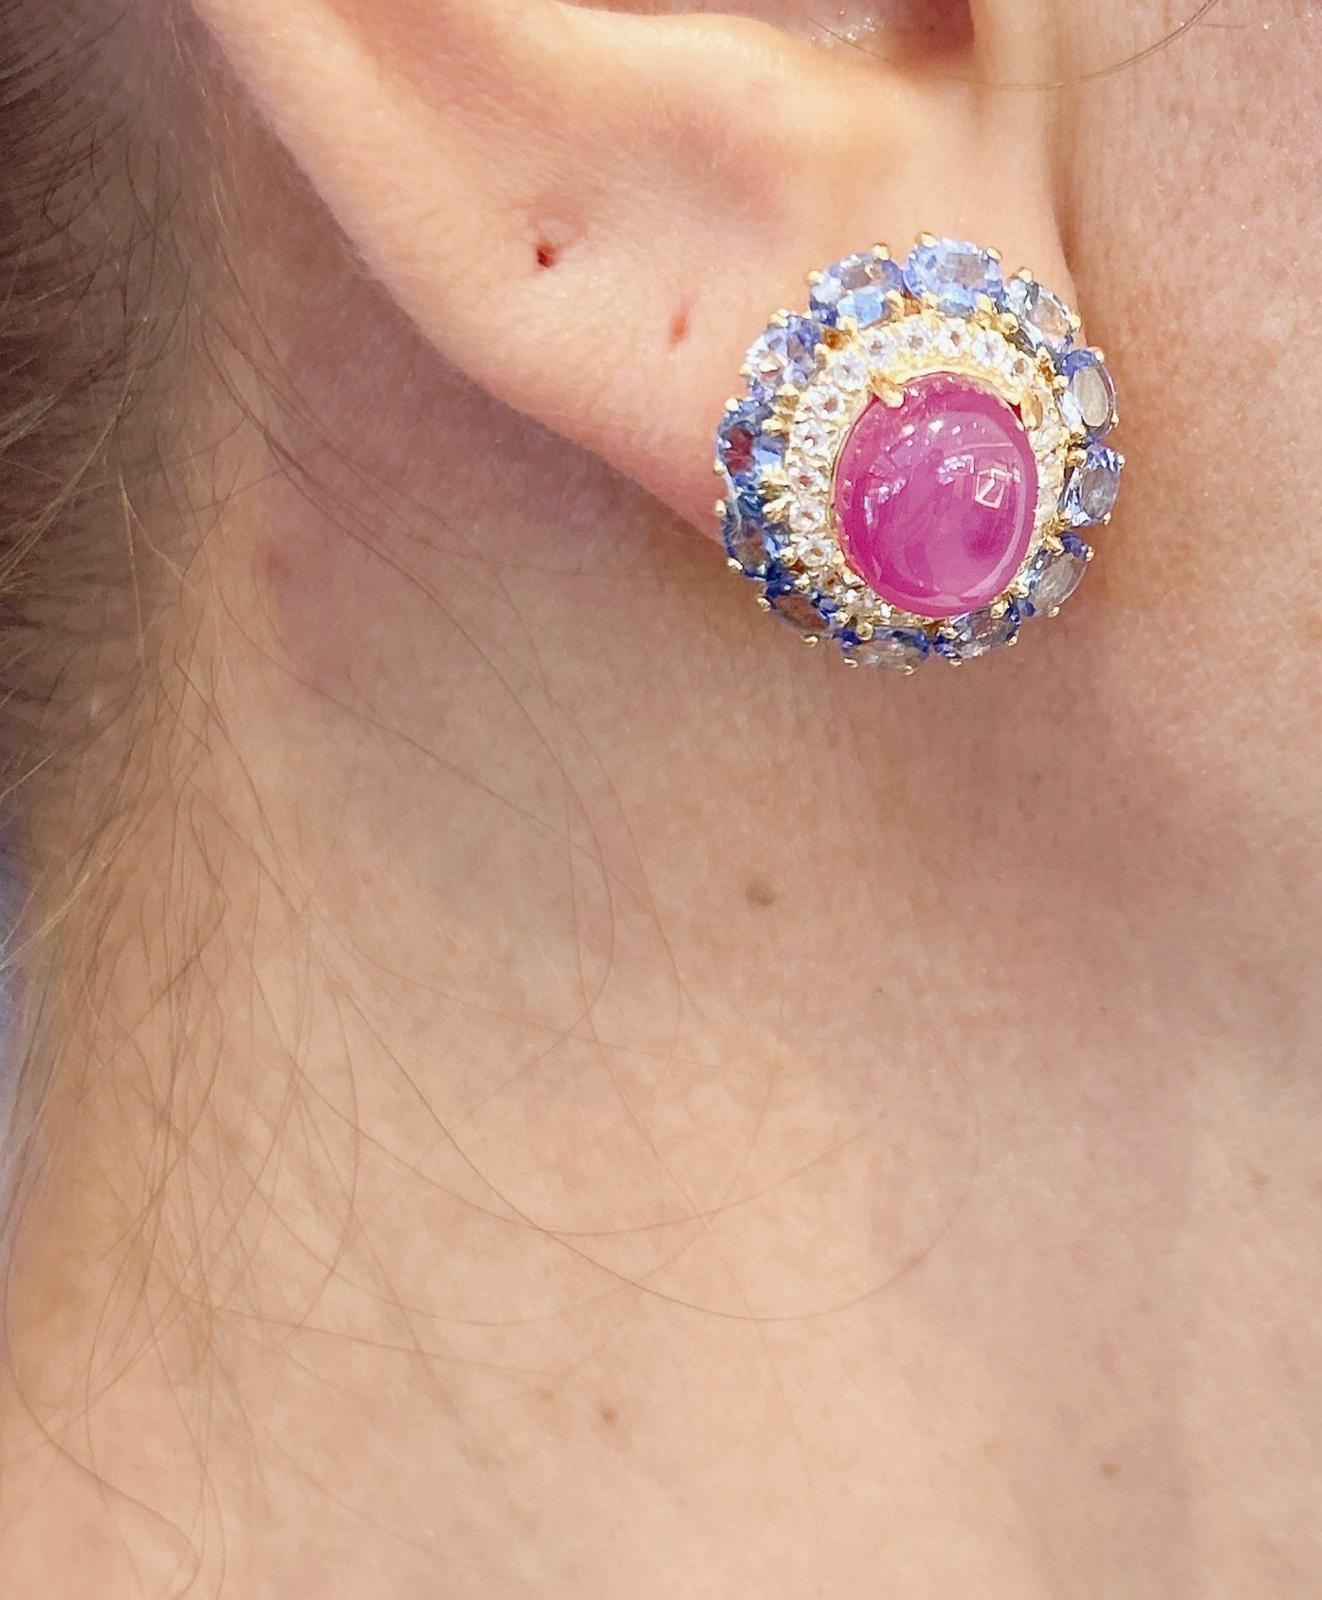 Bochic “Capri” Ruby & Tanzanite Clip on Earrings Set in 22k Gold & Silver In New Condition For Sale In New York, NY